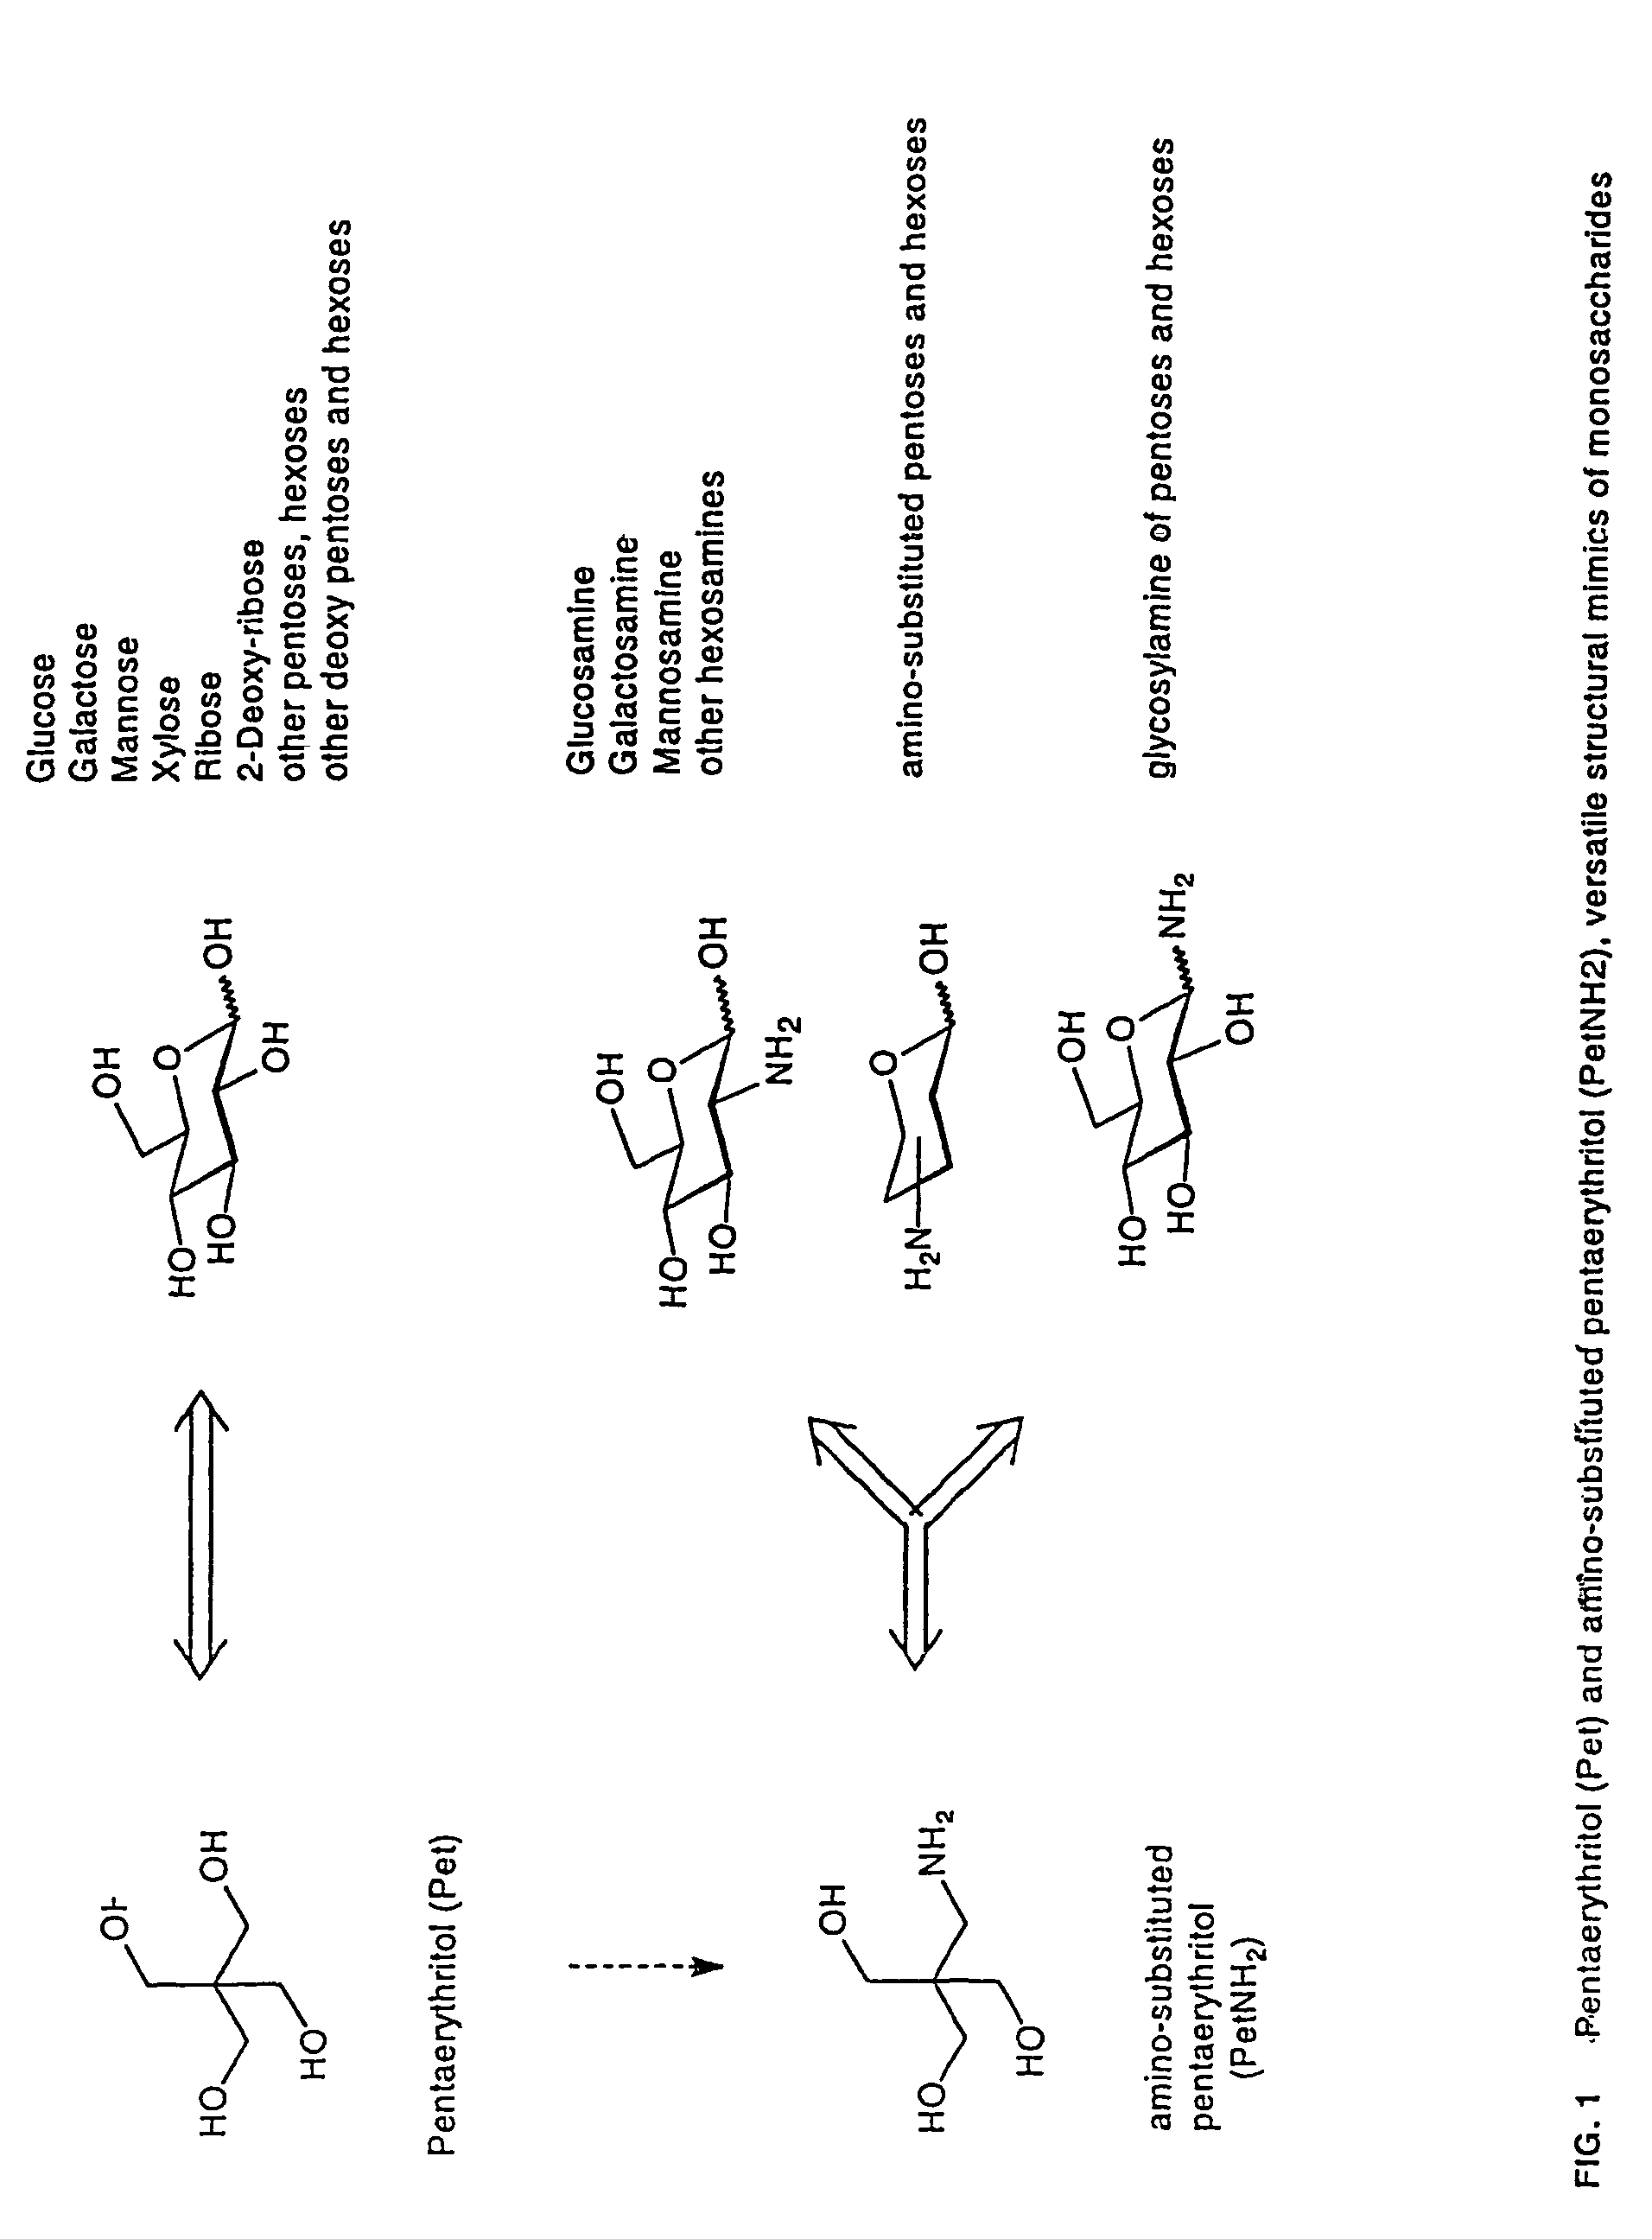 Lipid A and other carbohydrate ligand analogs